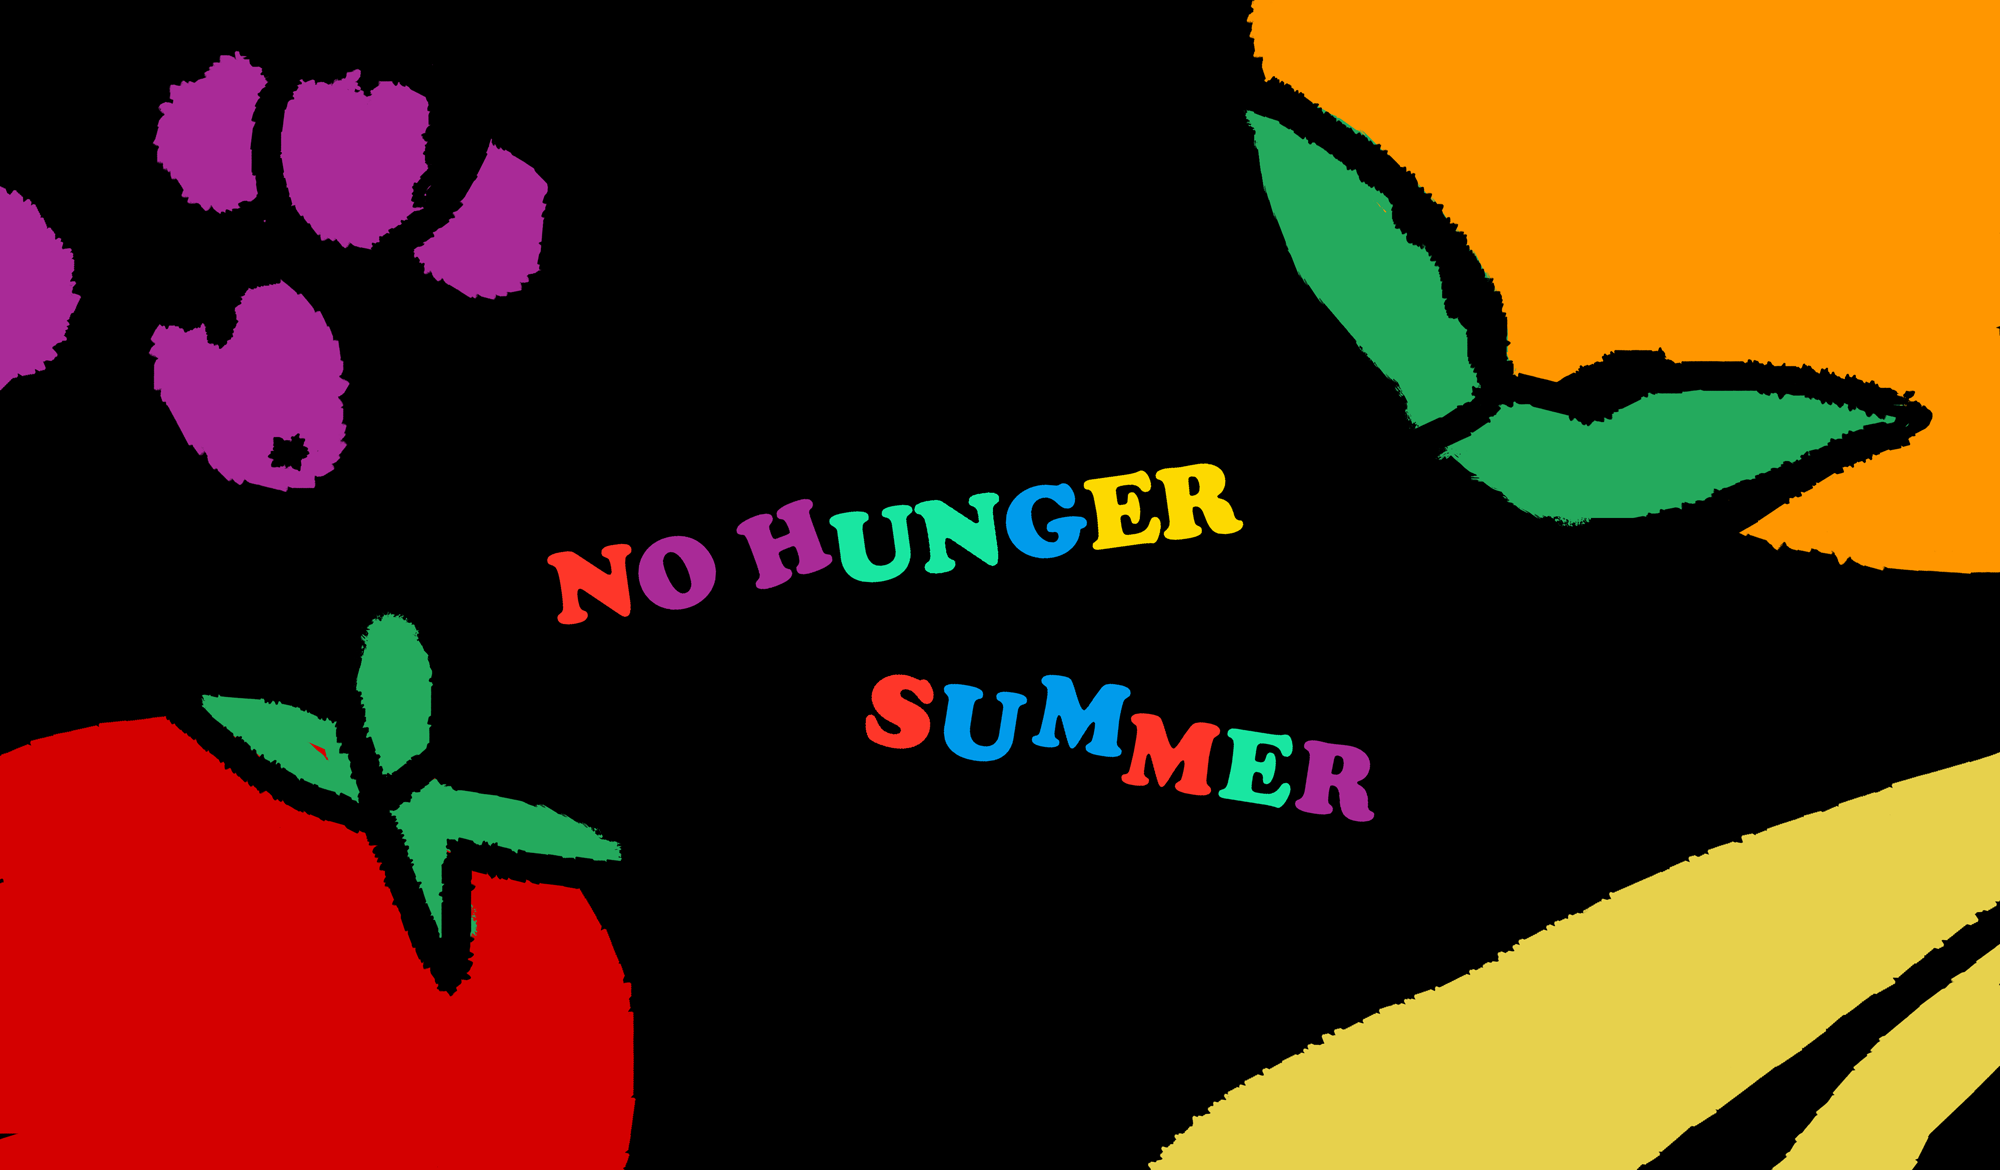 Tell Gov. Reynolds to act now to ensure “No hungry summers in Iowa!”